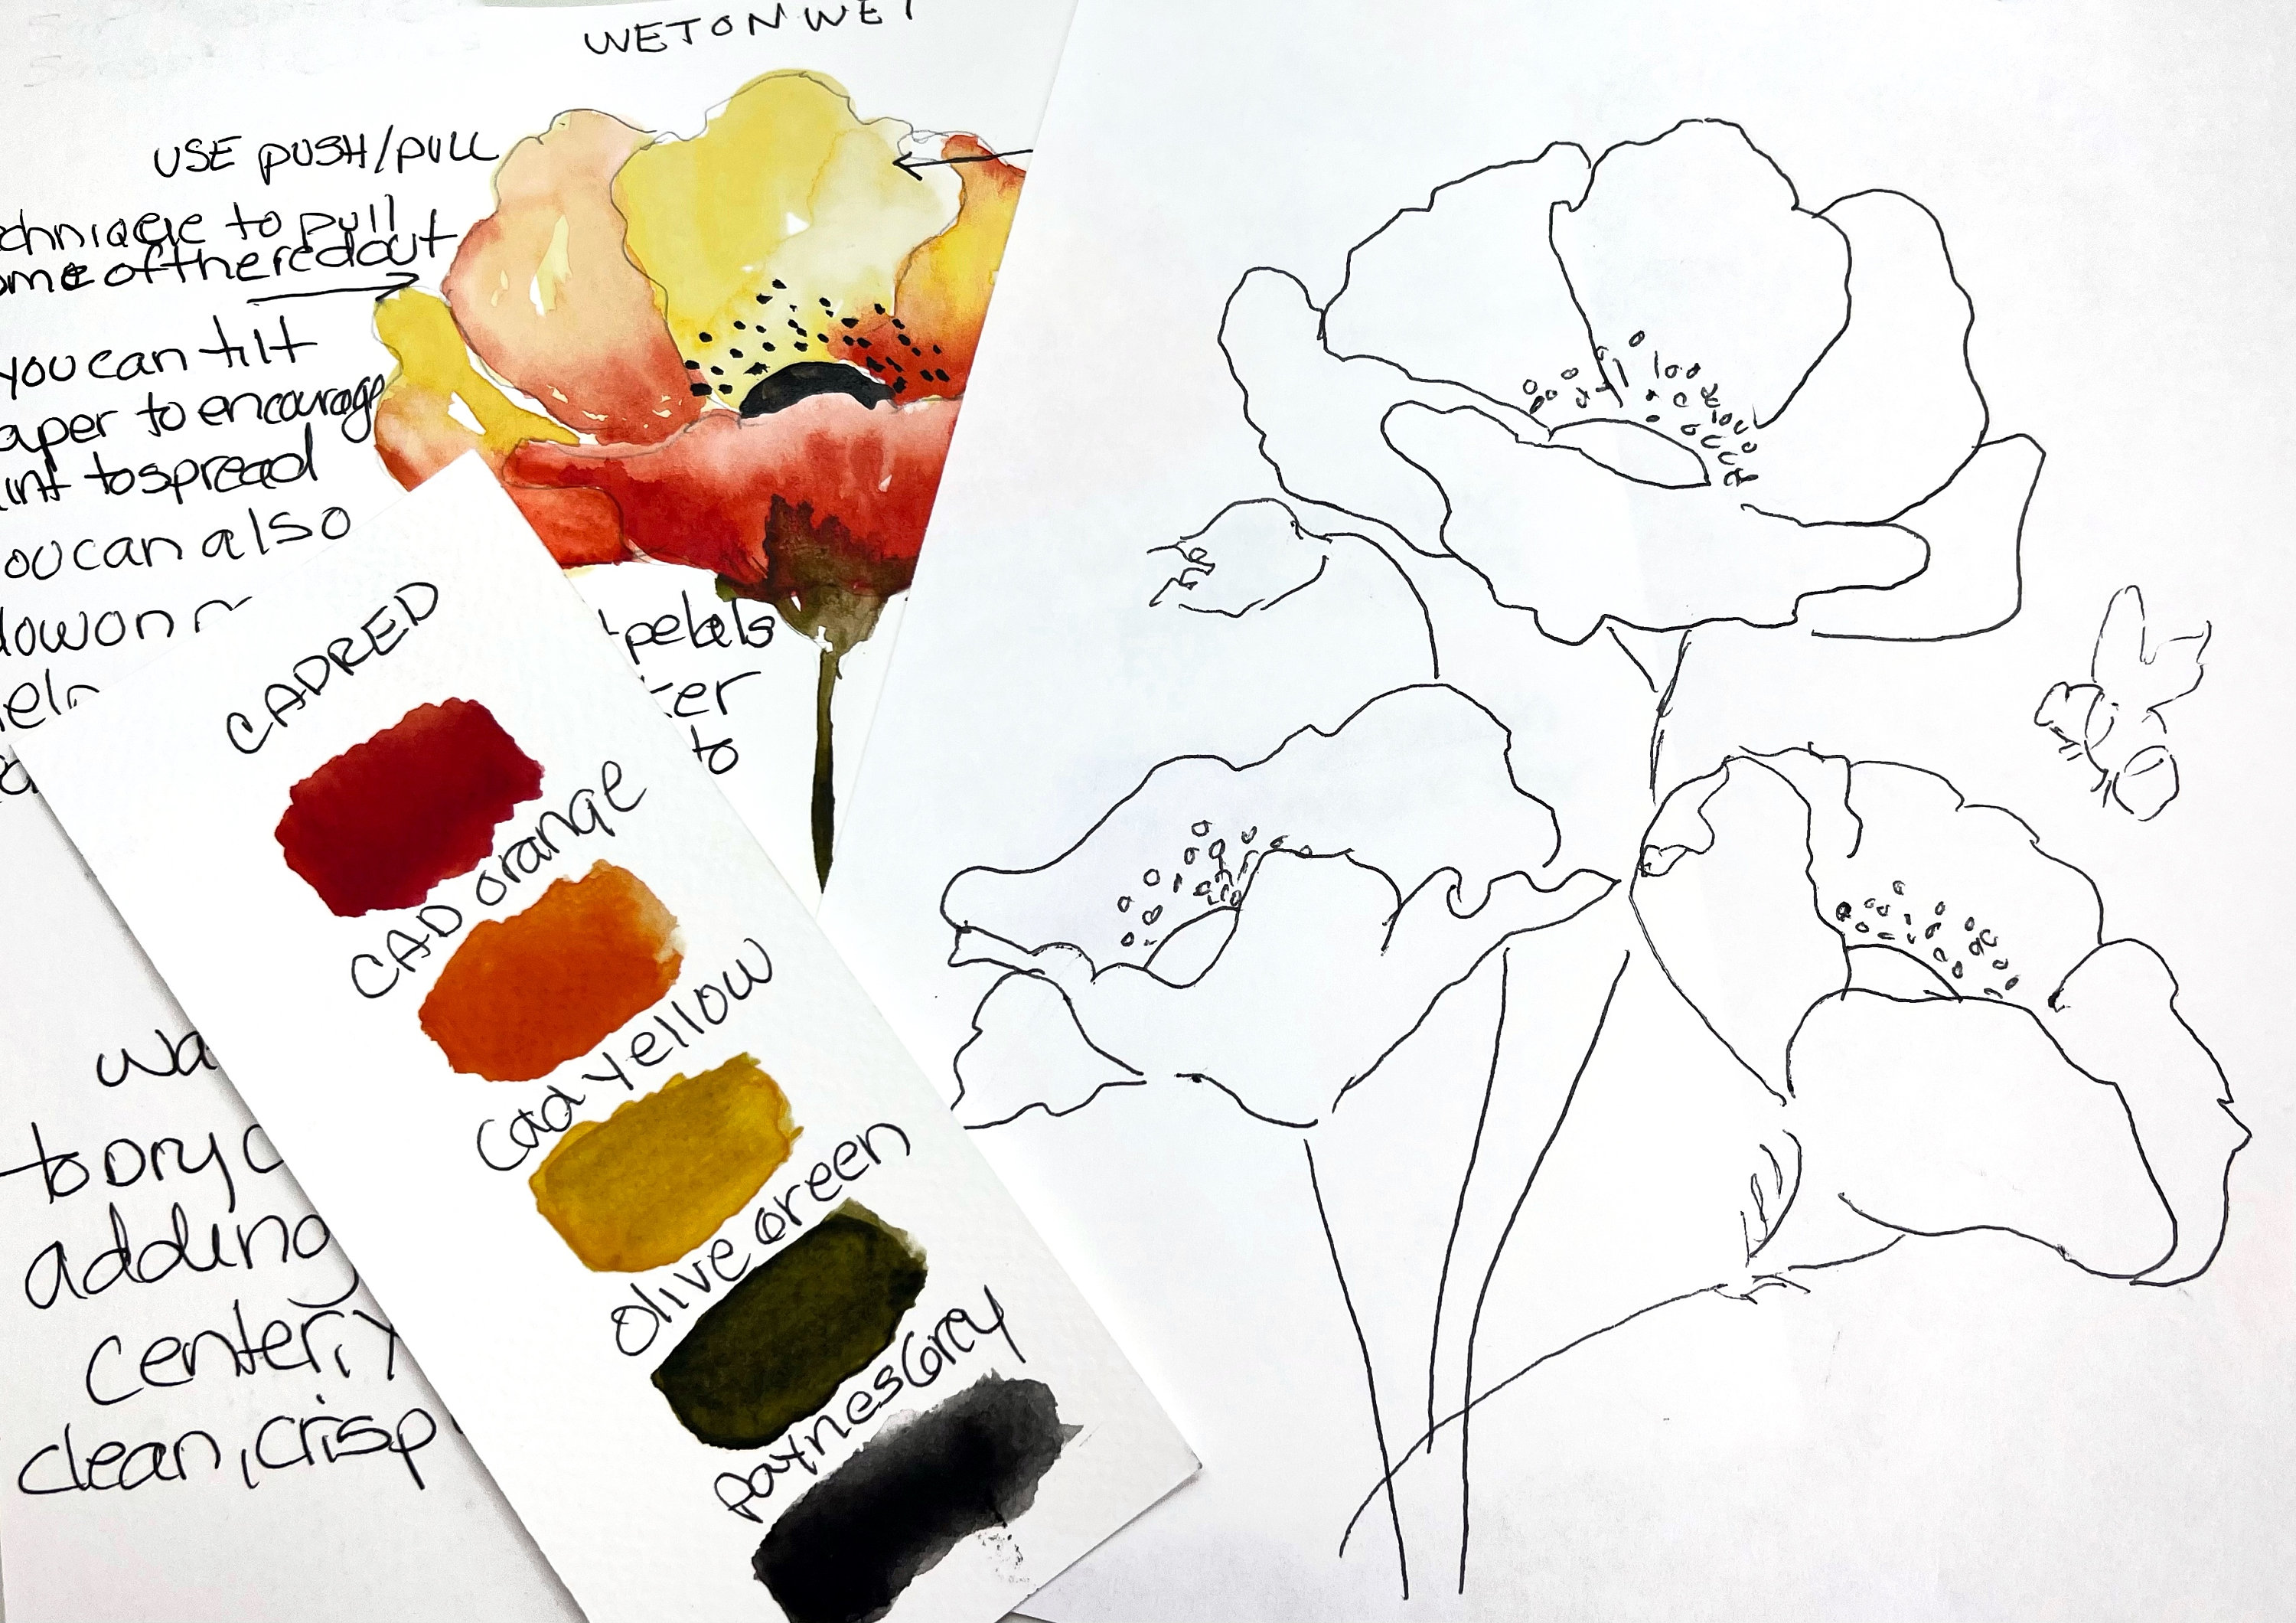 Greeting Cards Watercolor Painting Kit 